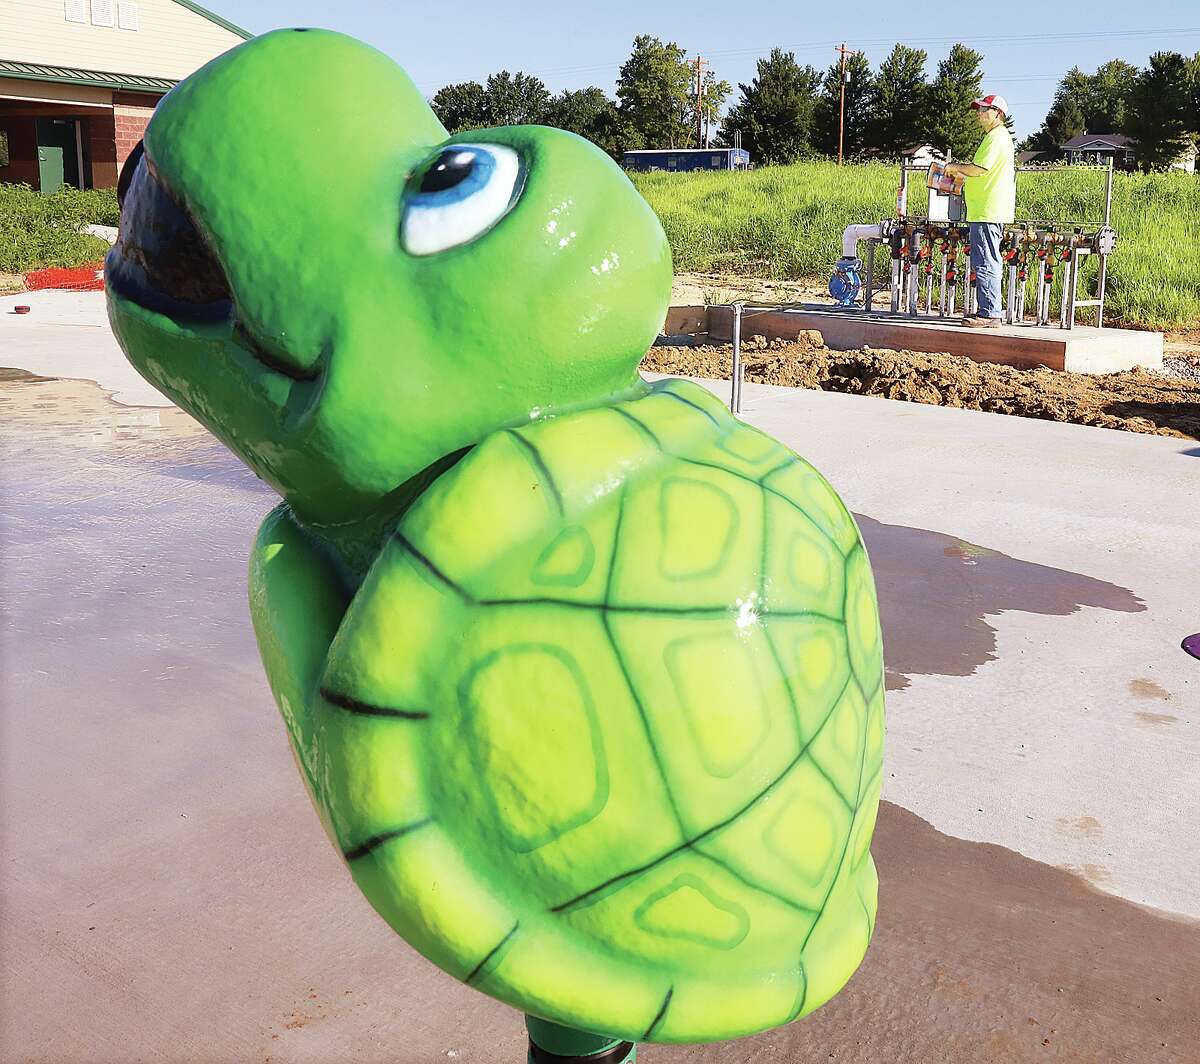 John Badman|The Telegraph A turtle shaped water sprayer sits ready for testing as a worker mans the valves that control the splash pad under development in Godfrey.